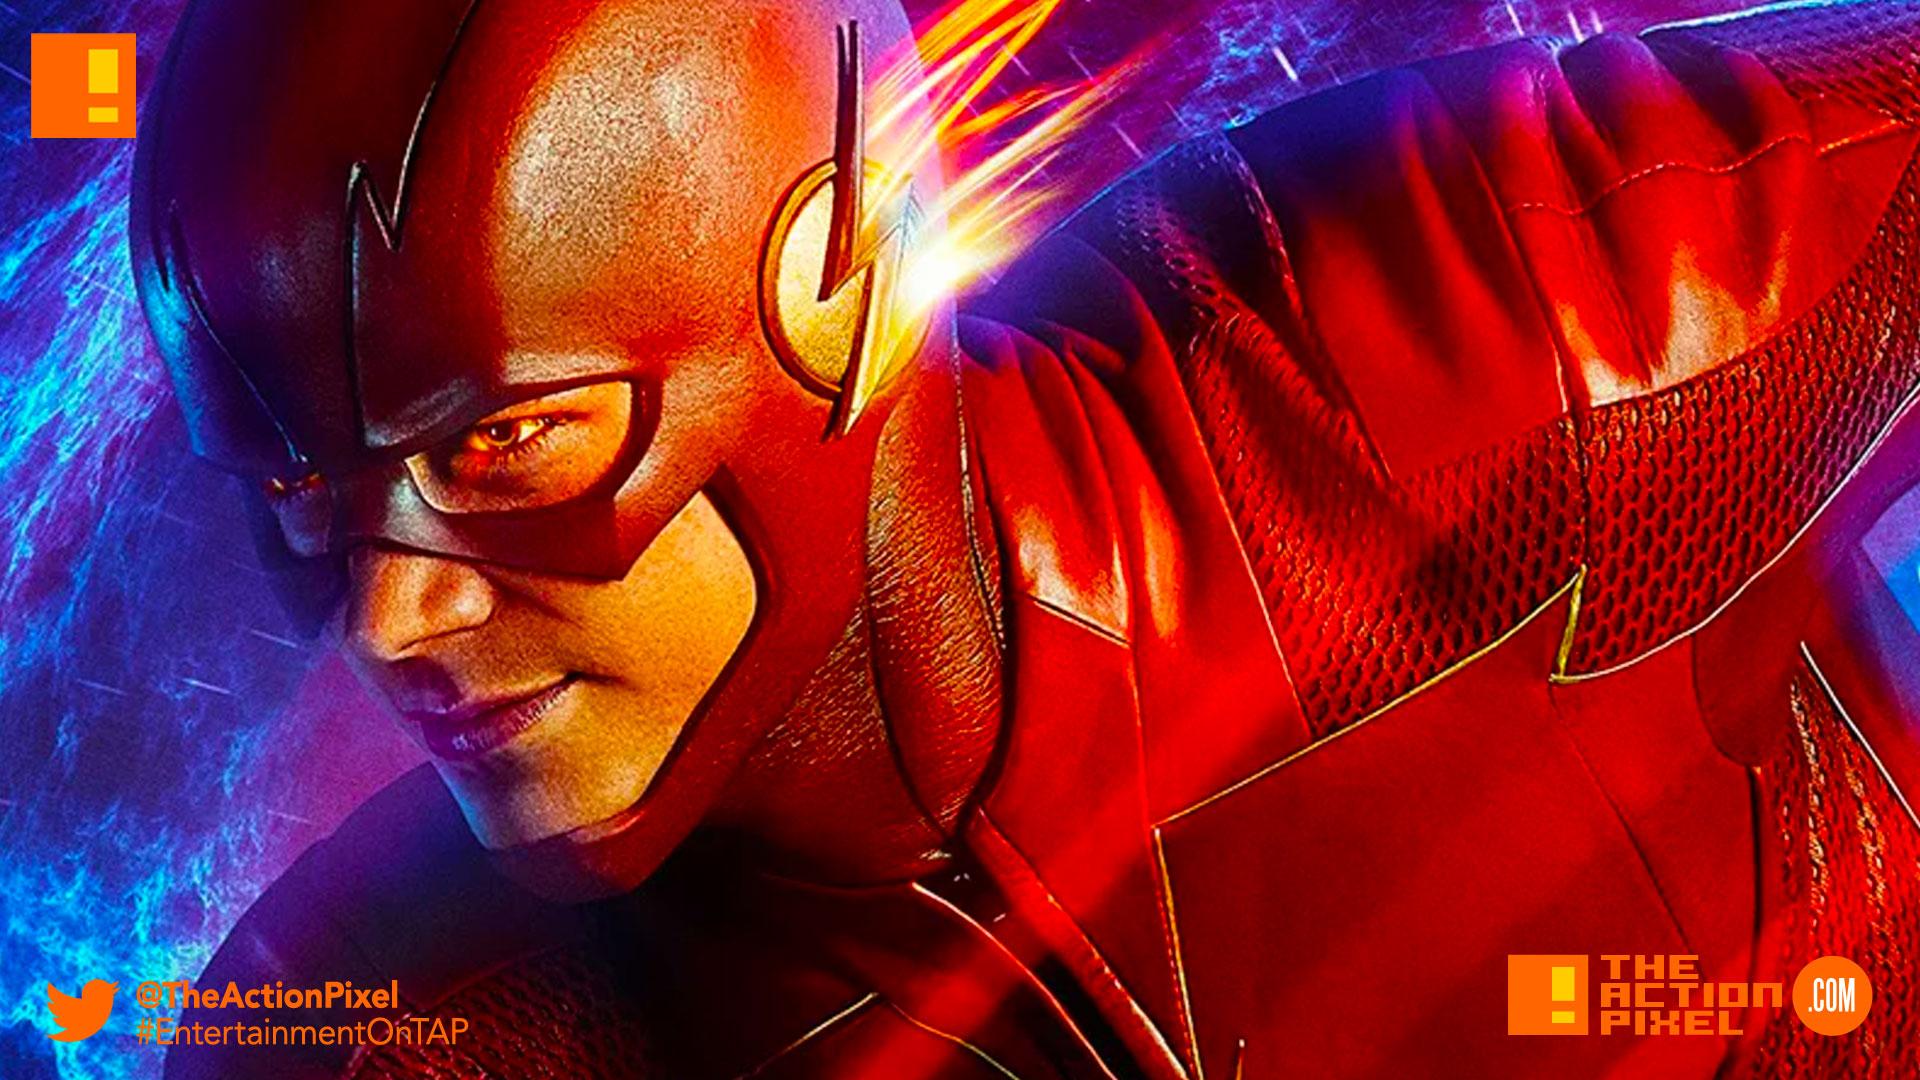 The Flash” Season 4 beholds the rebirth of the Scarlet Speedster